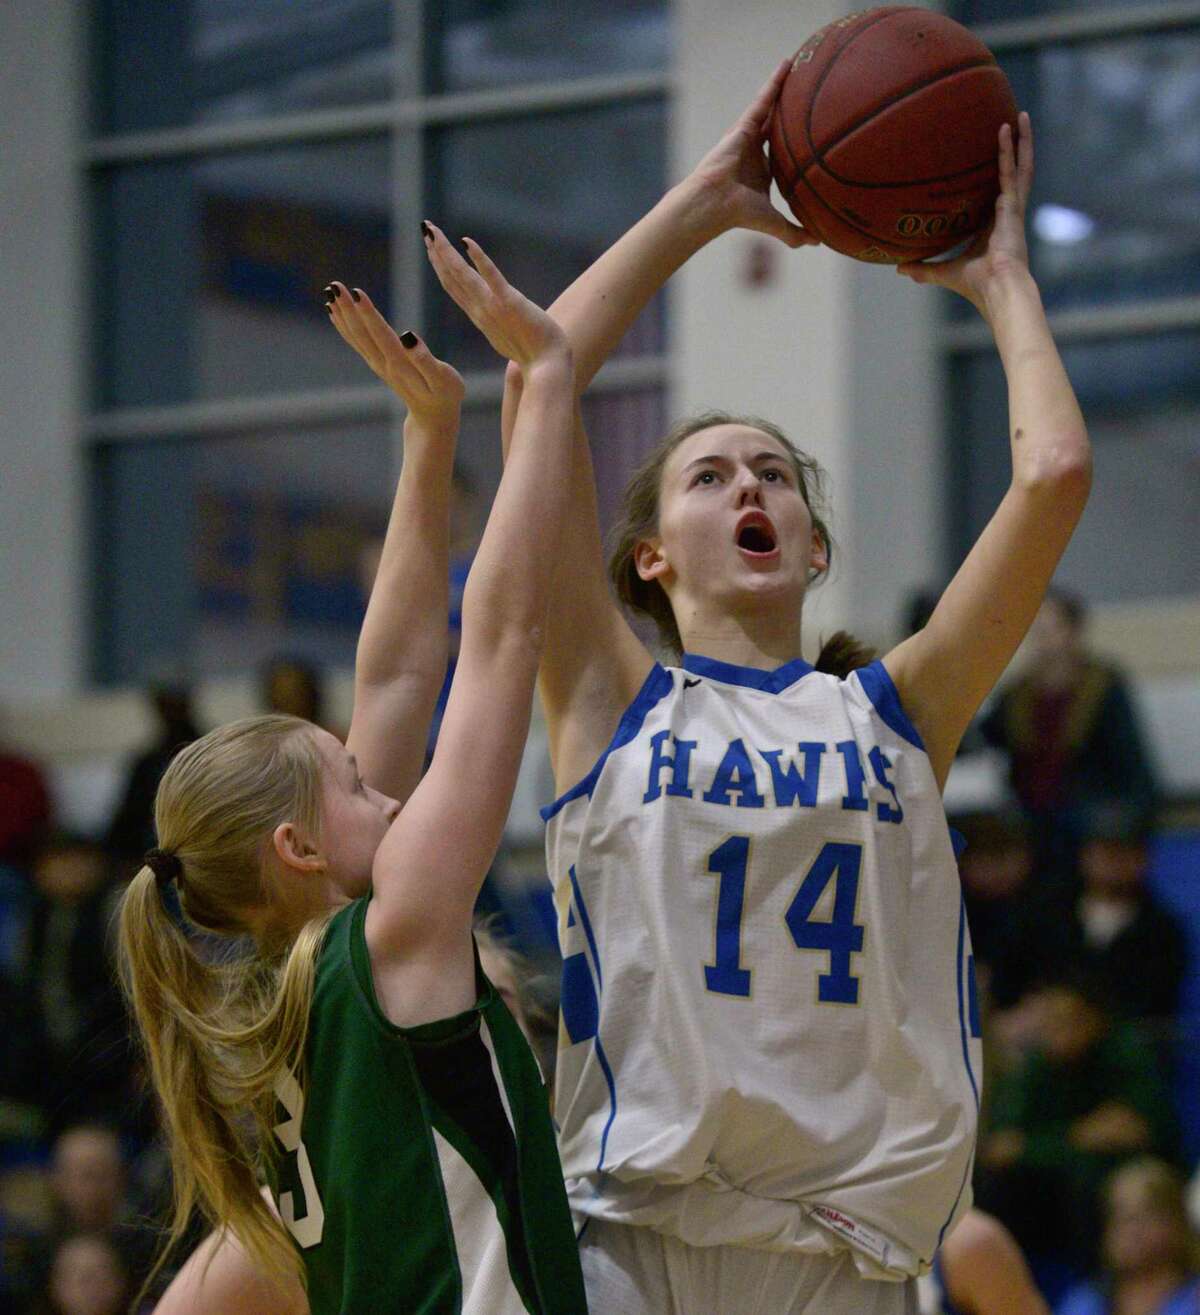 Newtown’s Juliette Cryder (14) goes up with the ball over New Milford’s Anna Holcomb (3) in the girls’ SWC basketball tournament quarterfinal game on Friday night at Newtown High School.